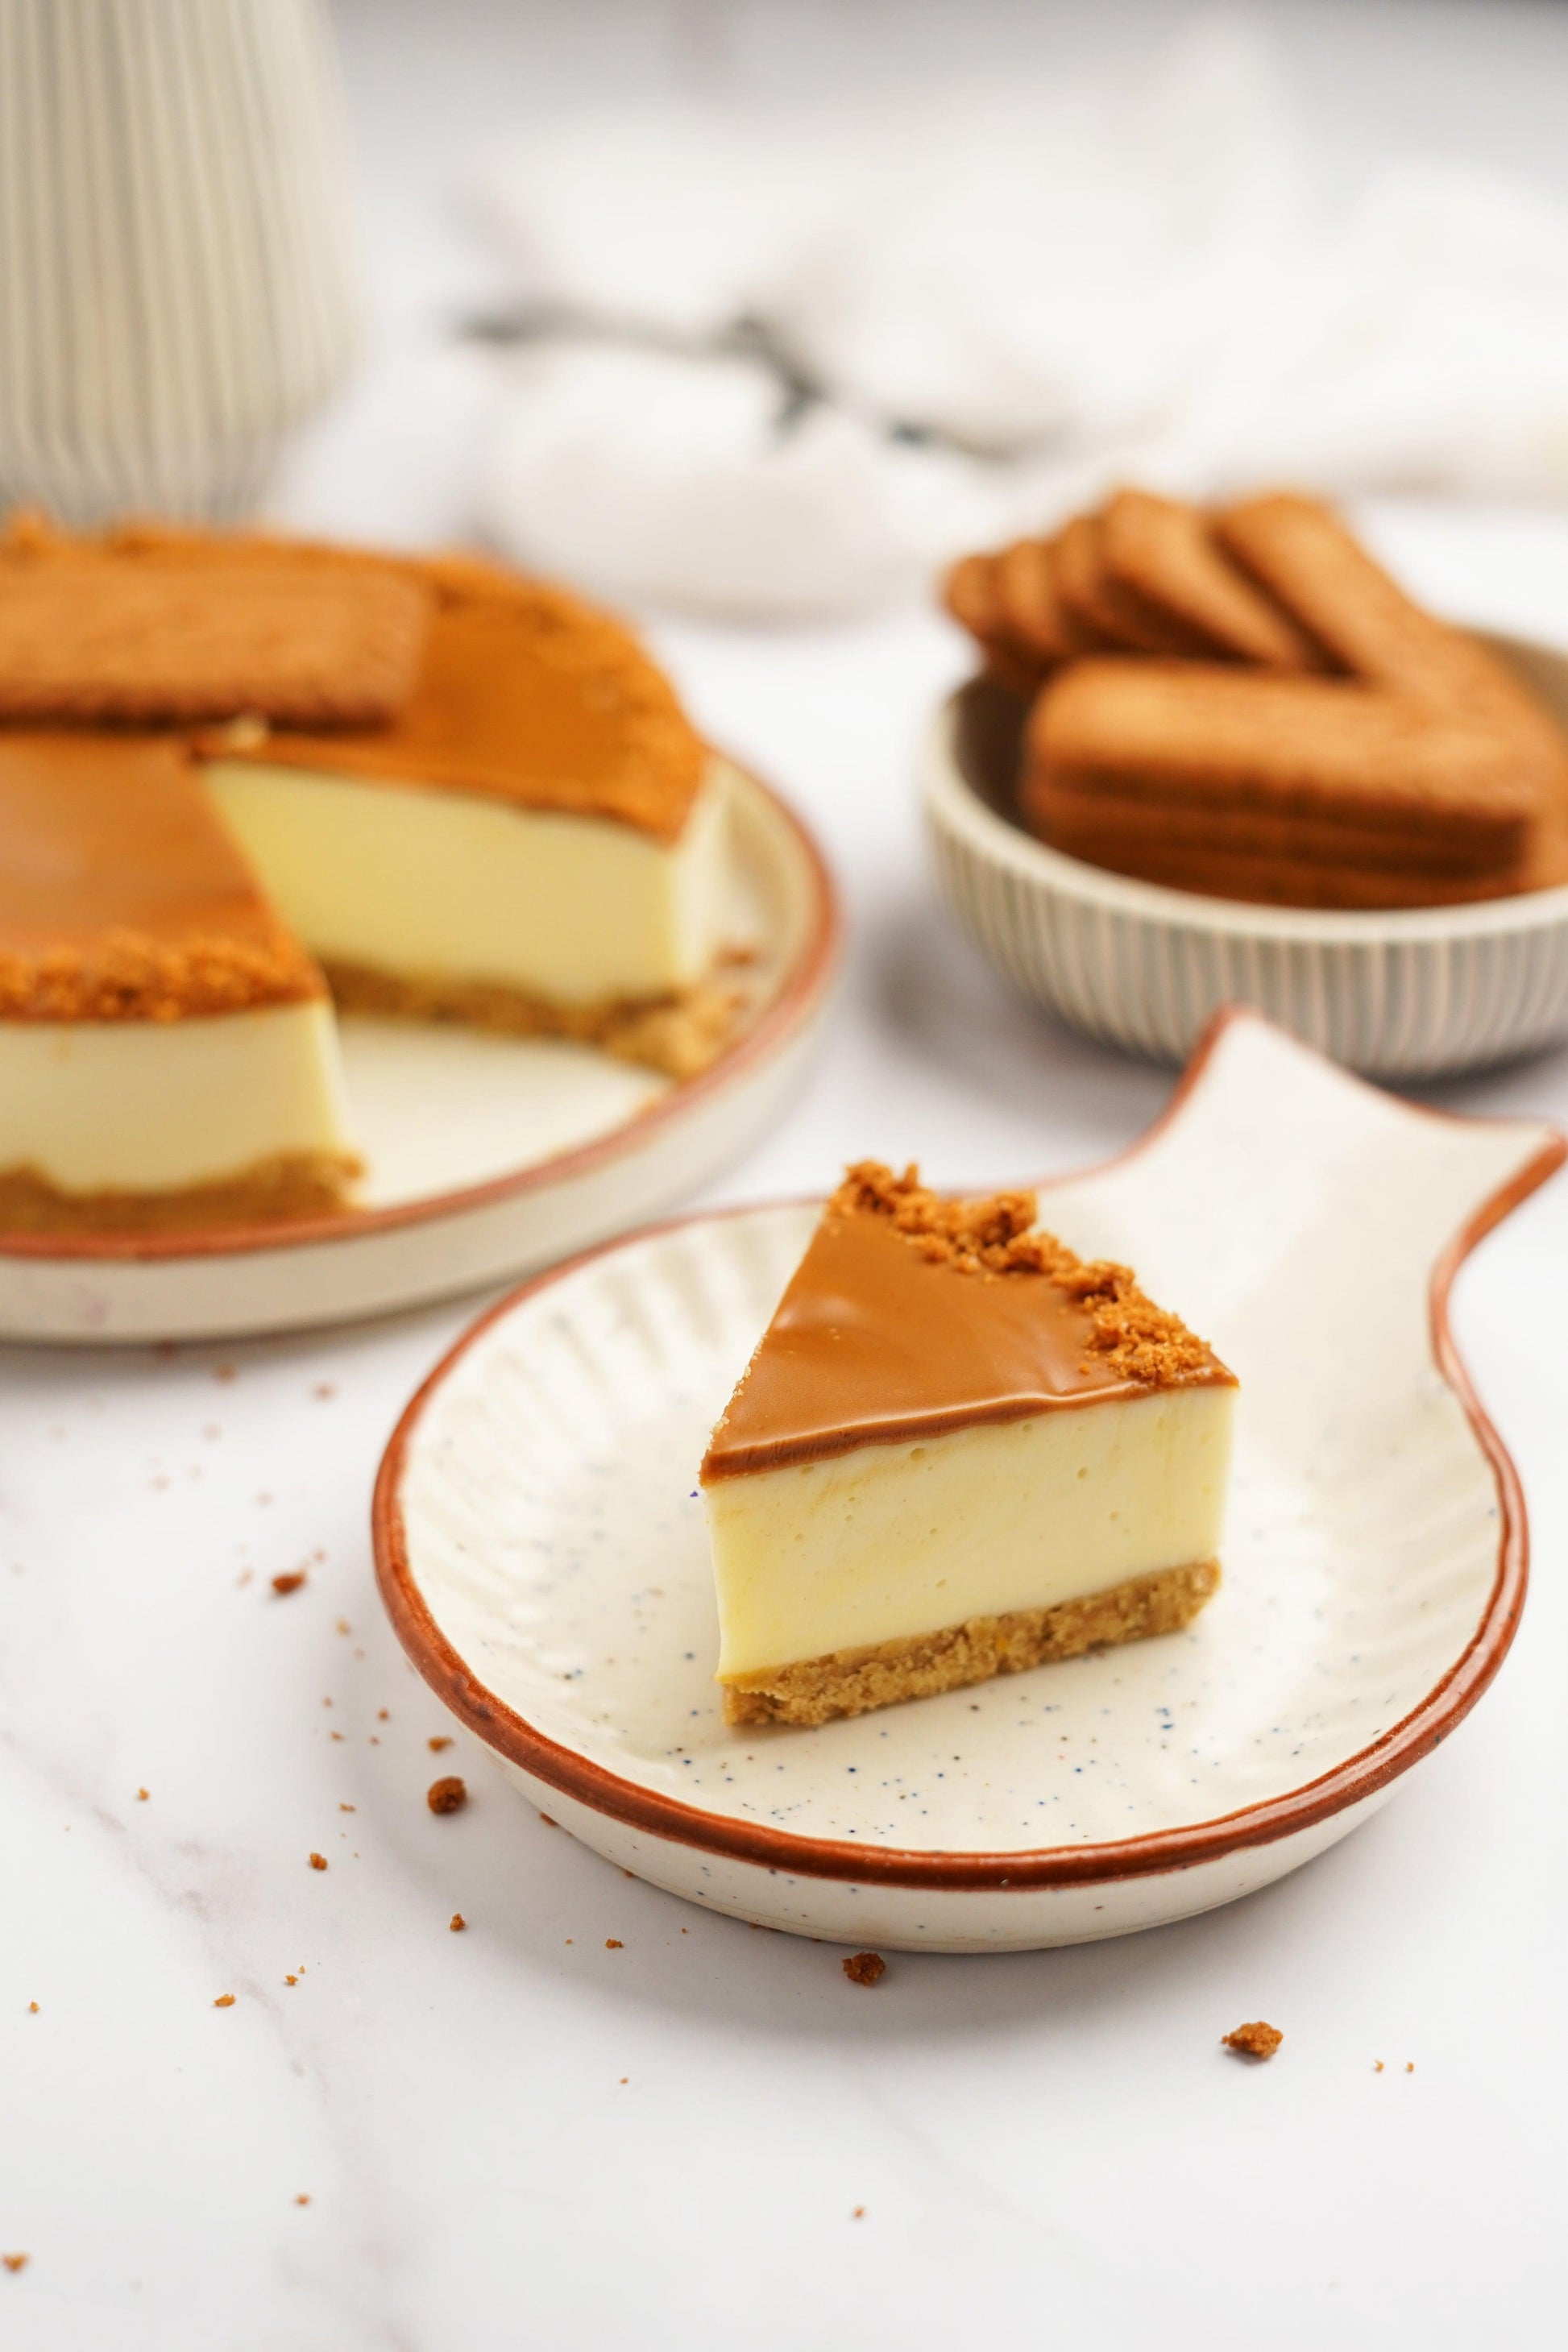 Lotus Biscoff Chilled Cheese Cake